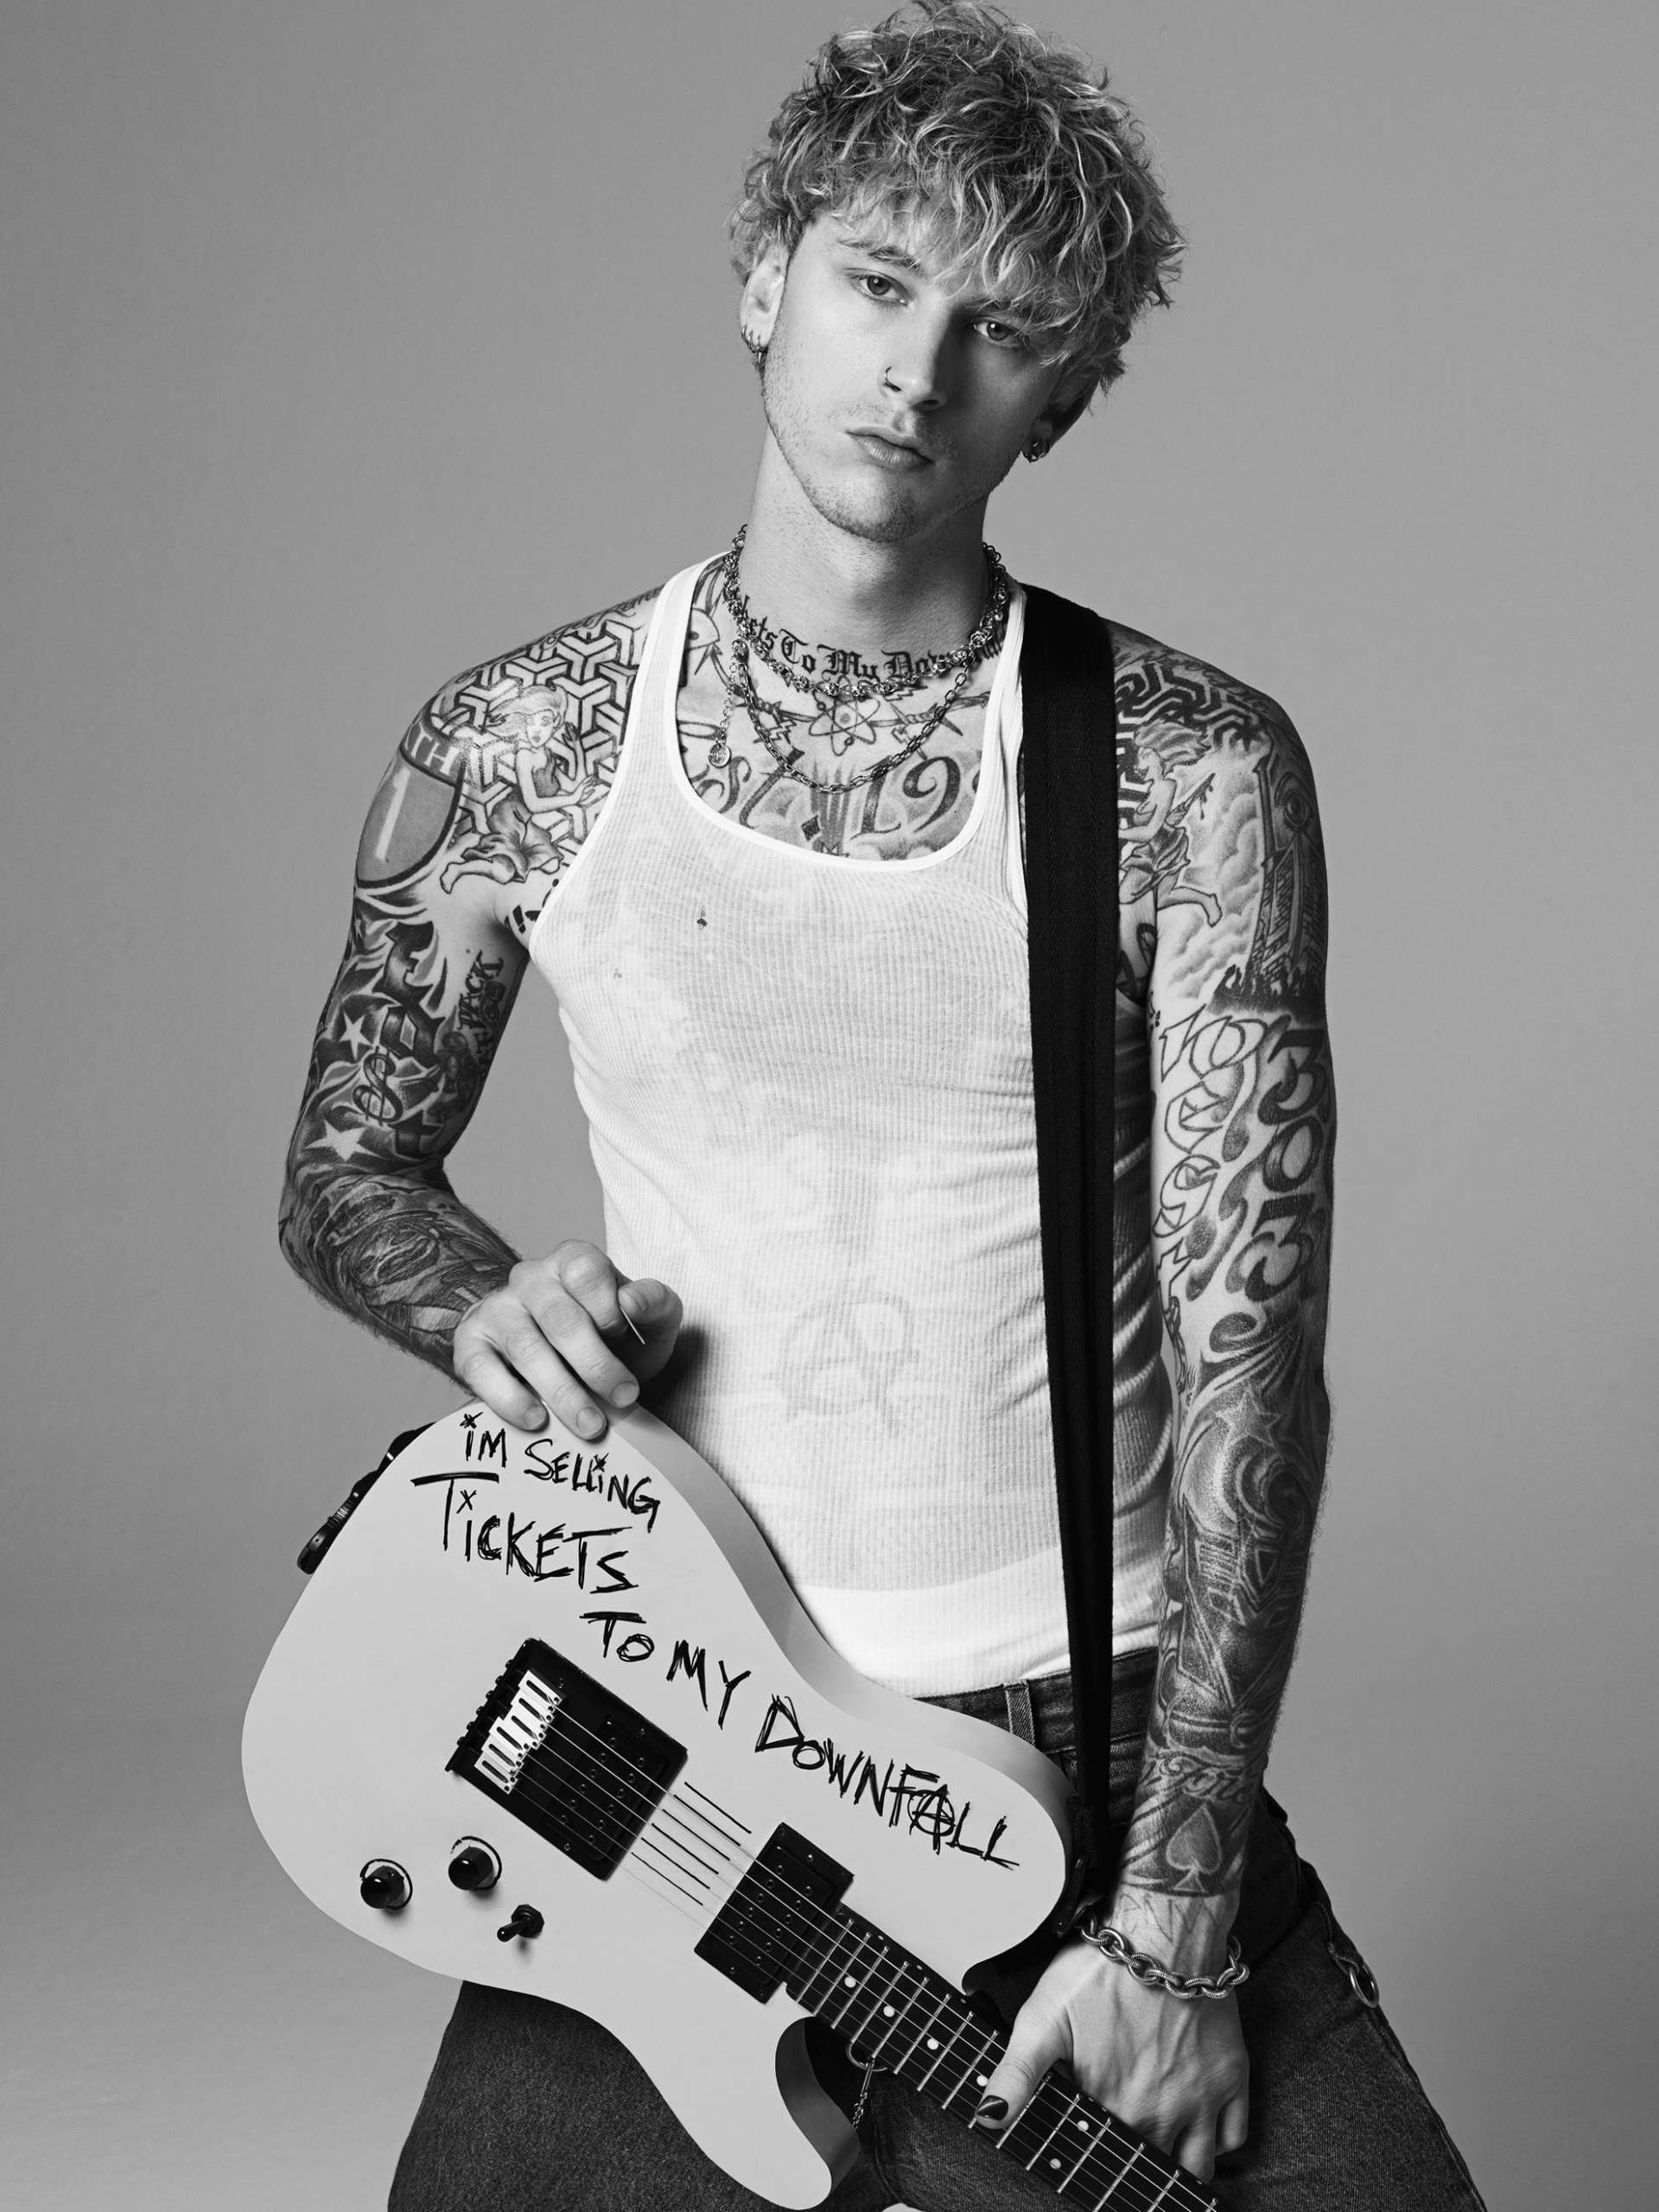 MACHINE GUN KELLY RELEASES EAGERLY ANTICIPATED FIFTH STUDIO ALBUM TICKETS TO MY DOWNFALL